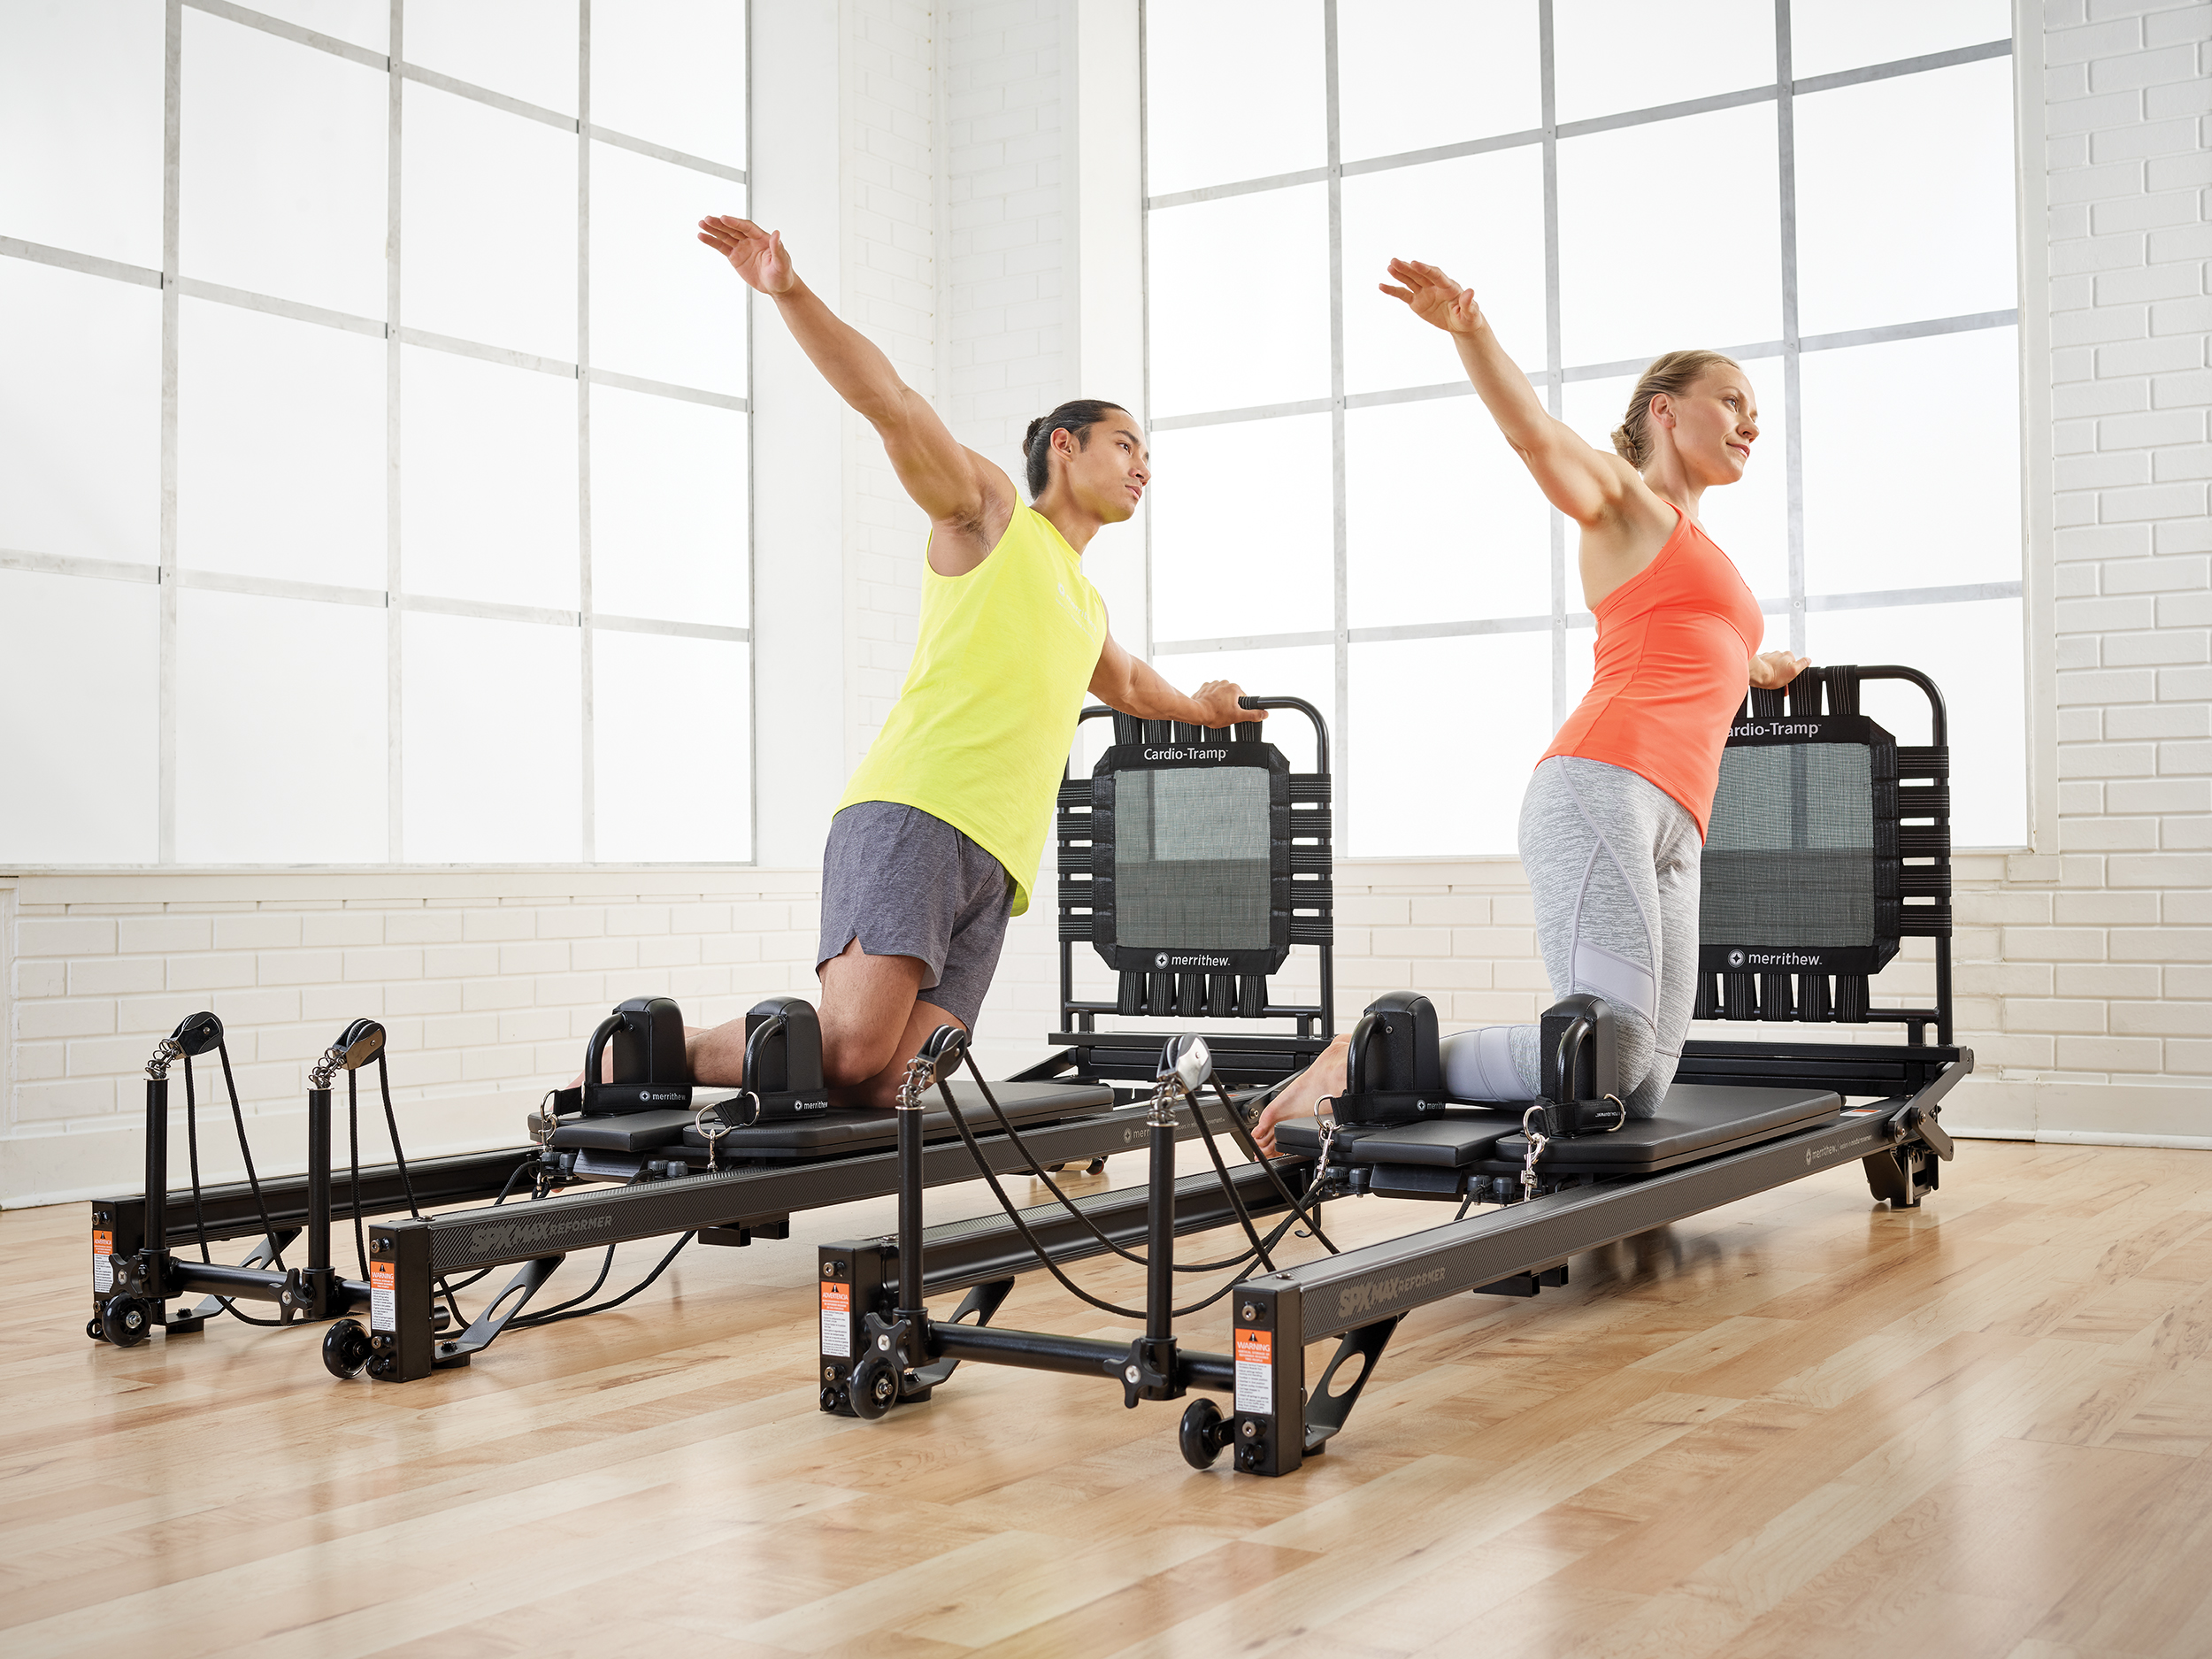 Why Become a Pilates Instructor